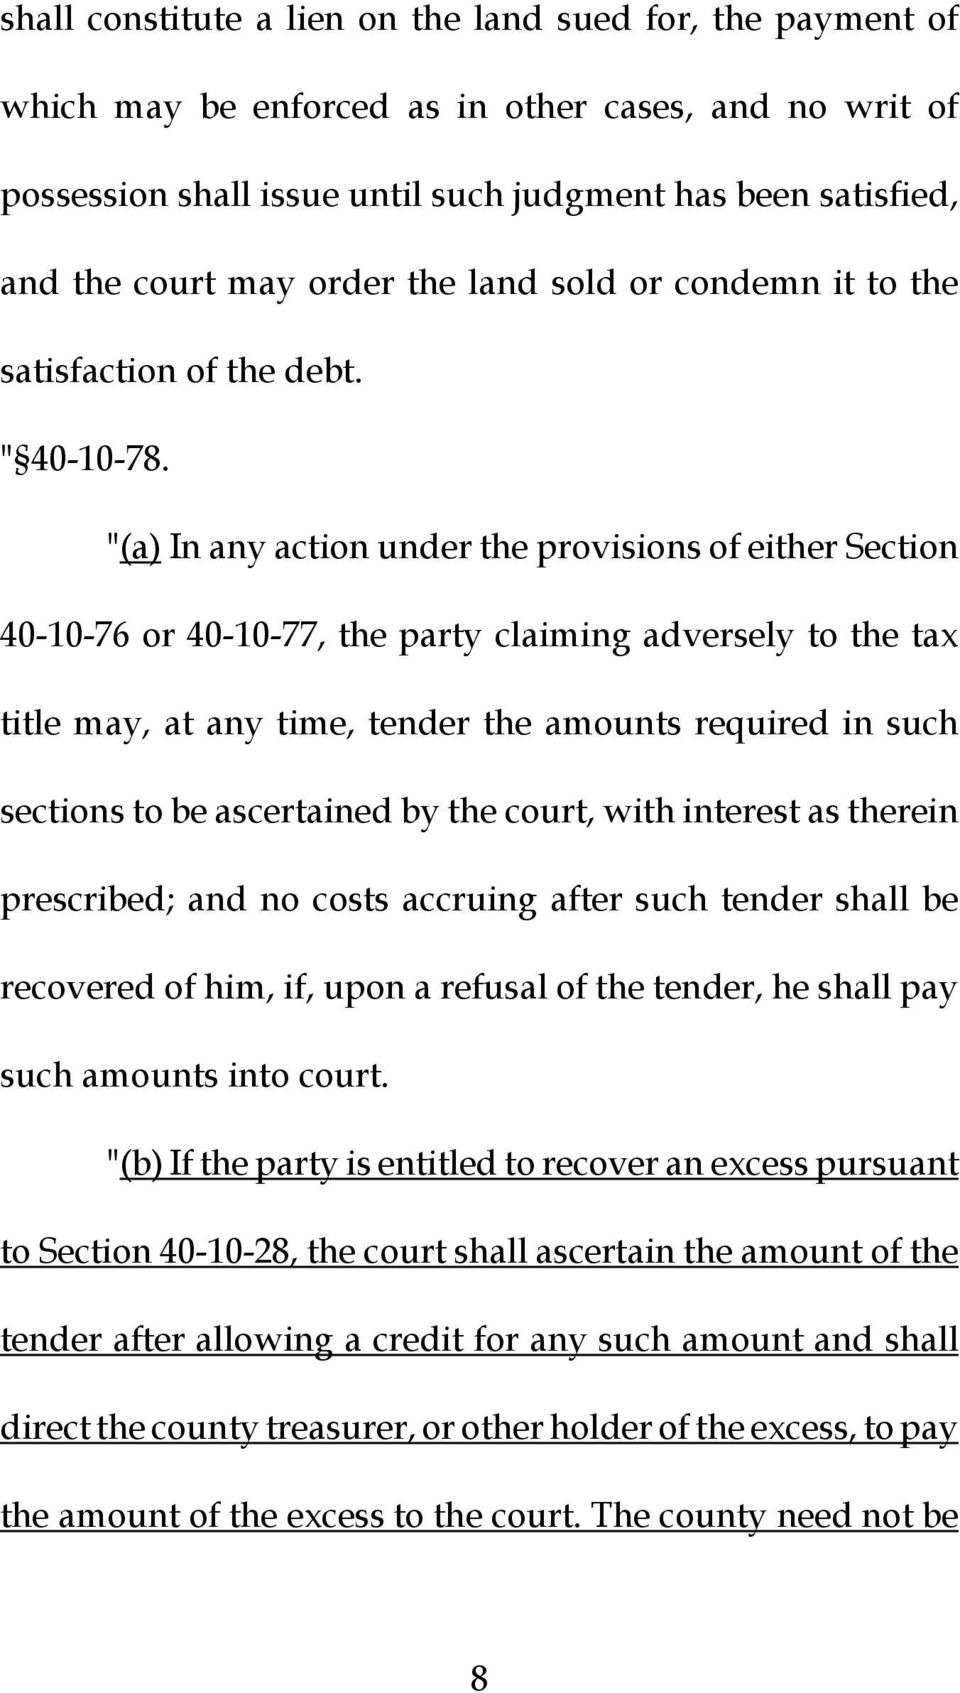 "(a) In any action under the provisions of either Section 40-10-76 or 40-10-77, the party claiming adversely to the tax title may, at any time, tender the amounts required in such sections to be